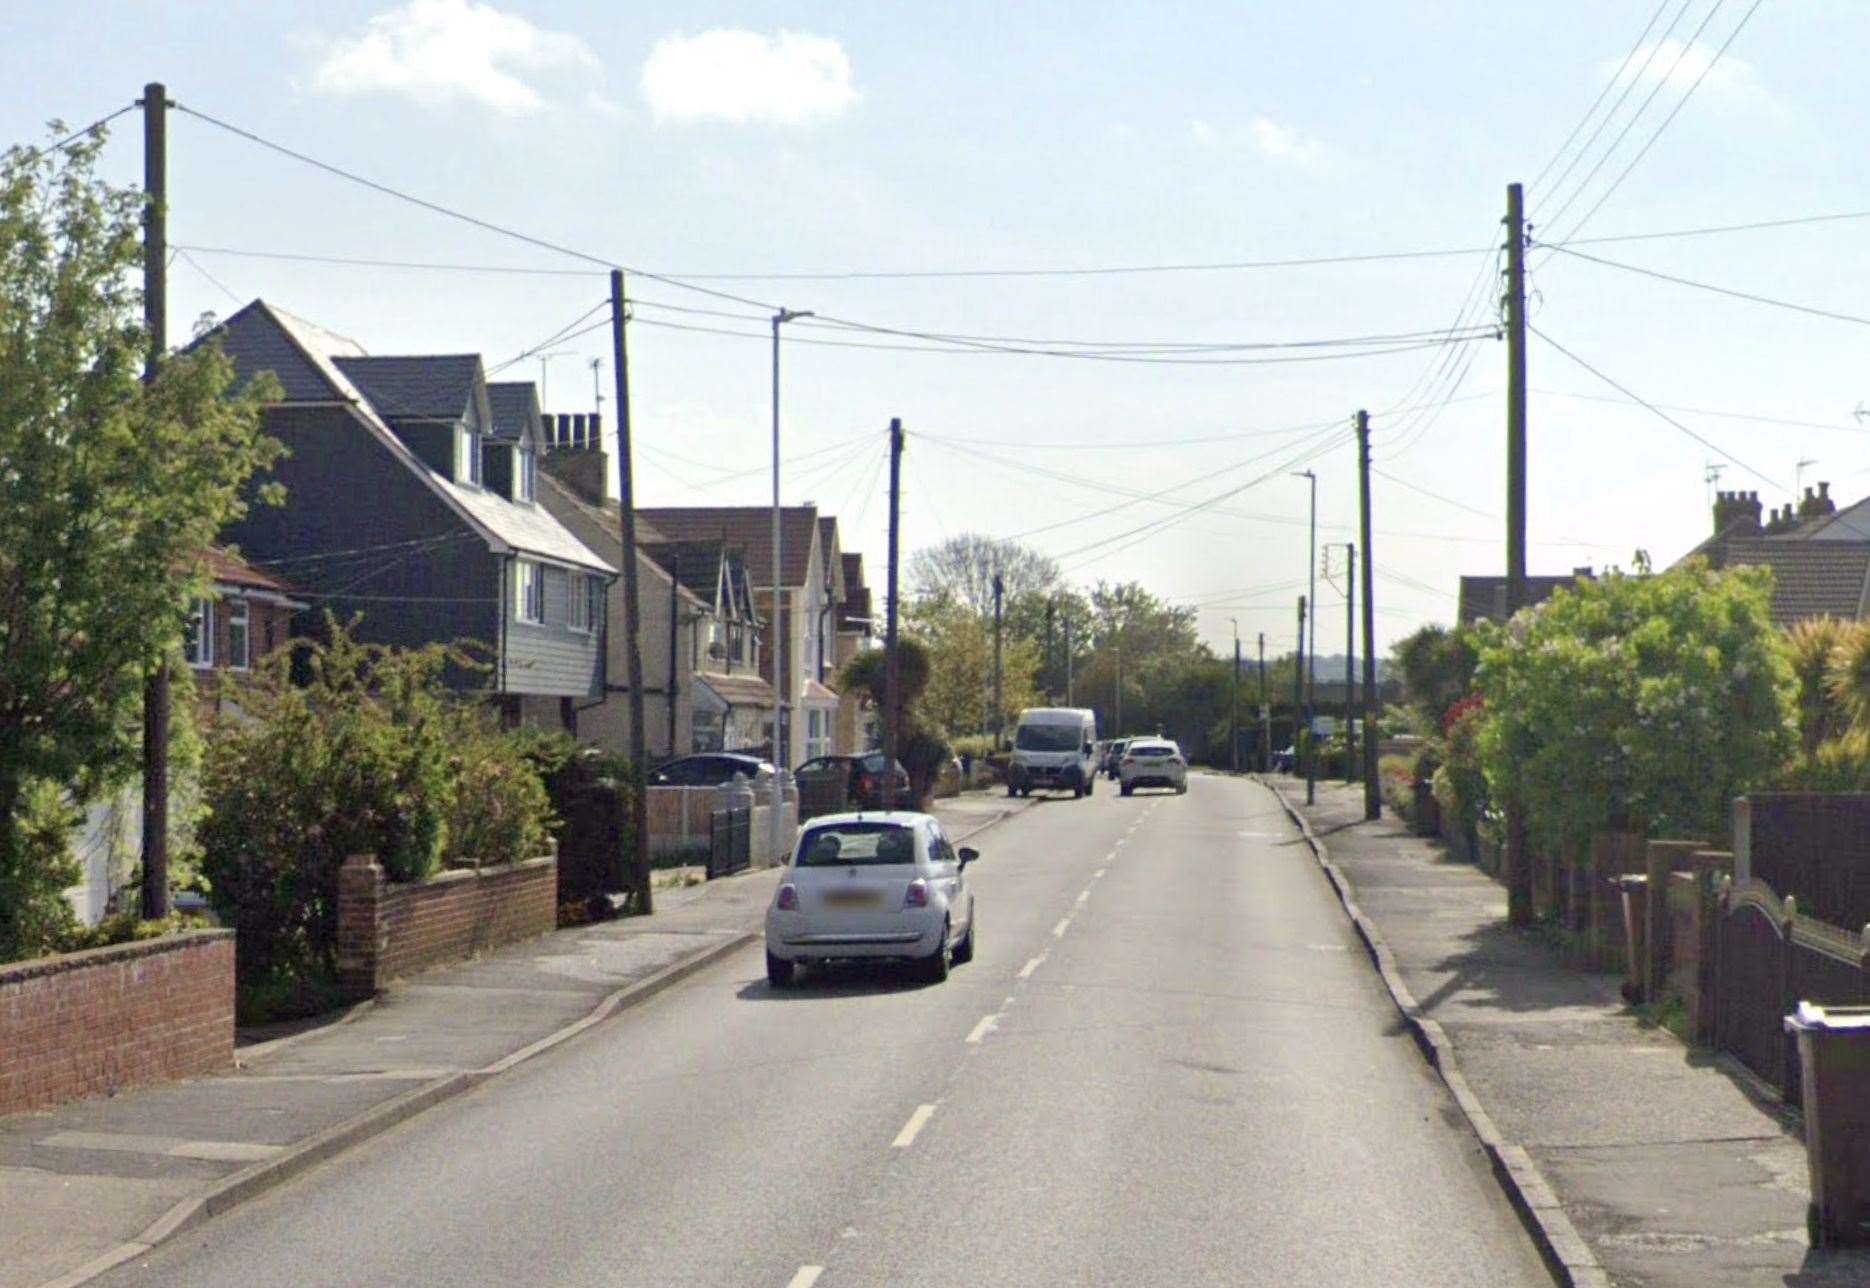 Firefighters were called to a house fire on Minster Road in Minster-on-Sea on Sunday afternoon. Picture: Google Maps